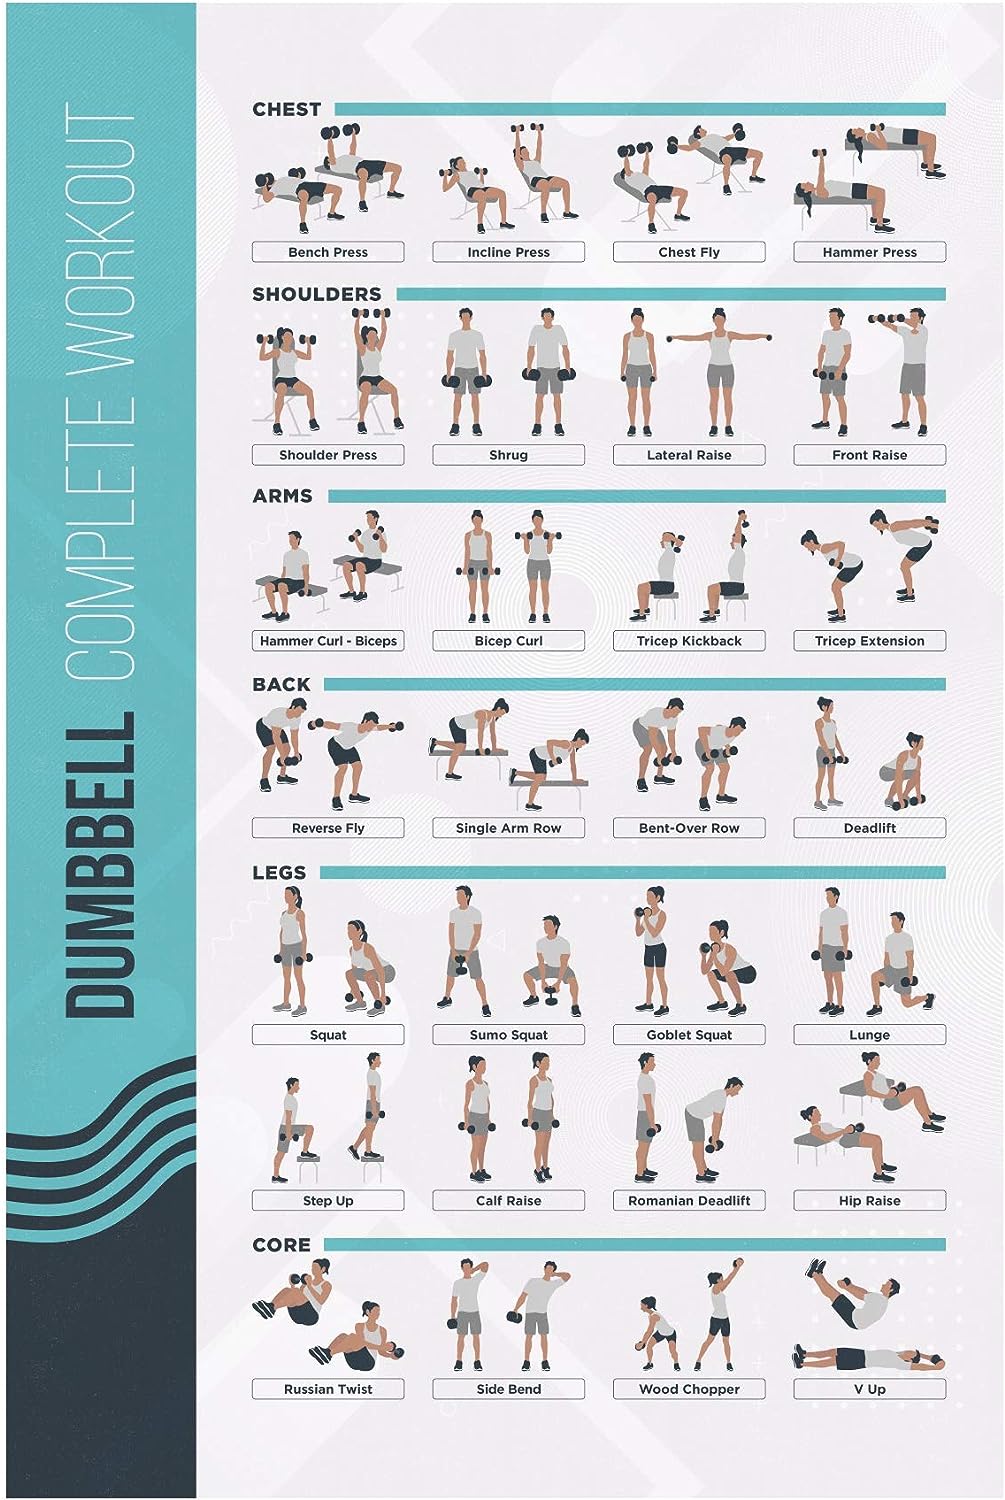 PosterMate - FitMate Workout Exercise Poster - Workout Routine with Free Weights, Home Gym Decor, Room Guide (42 x 63 cm, Dumbbell)